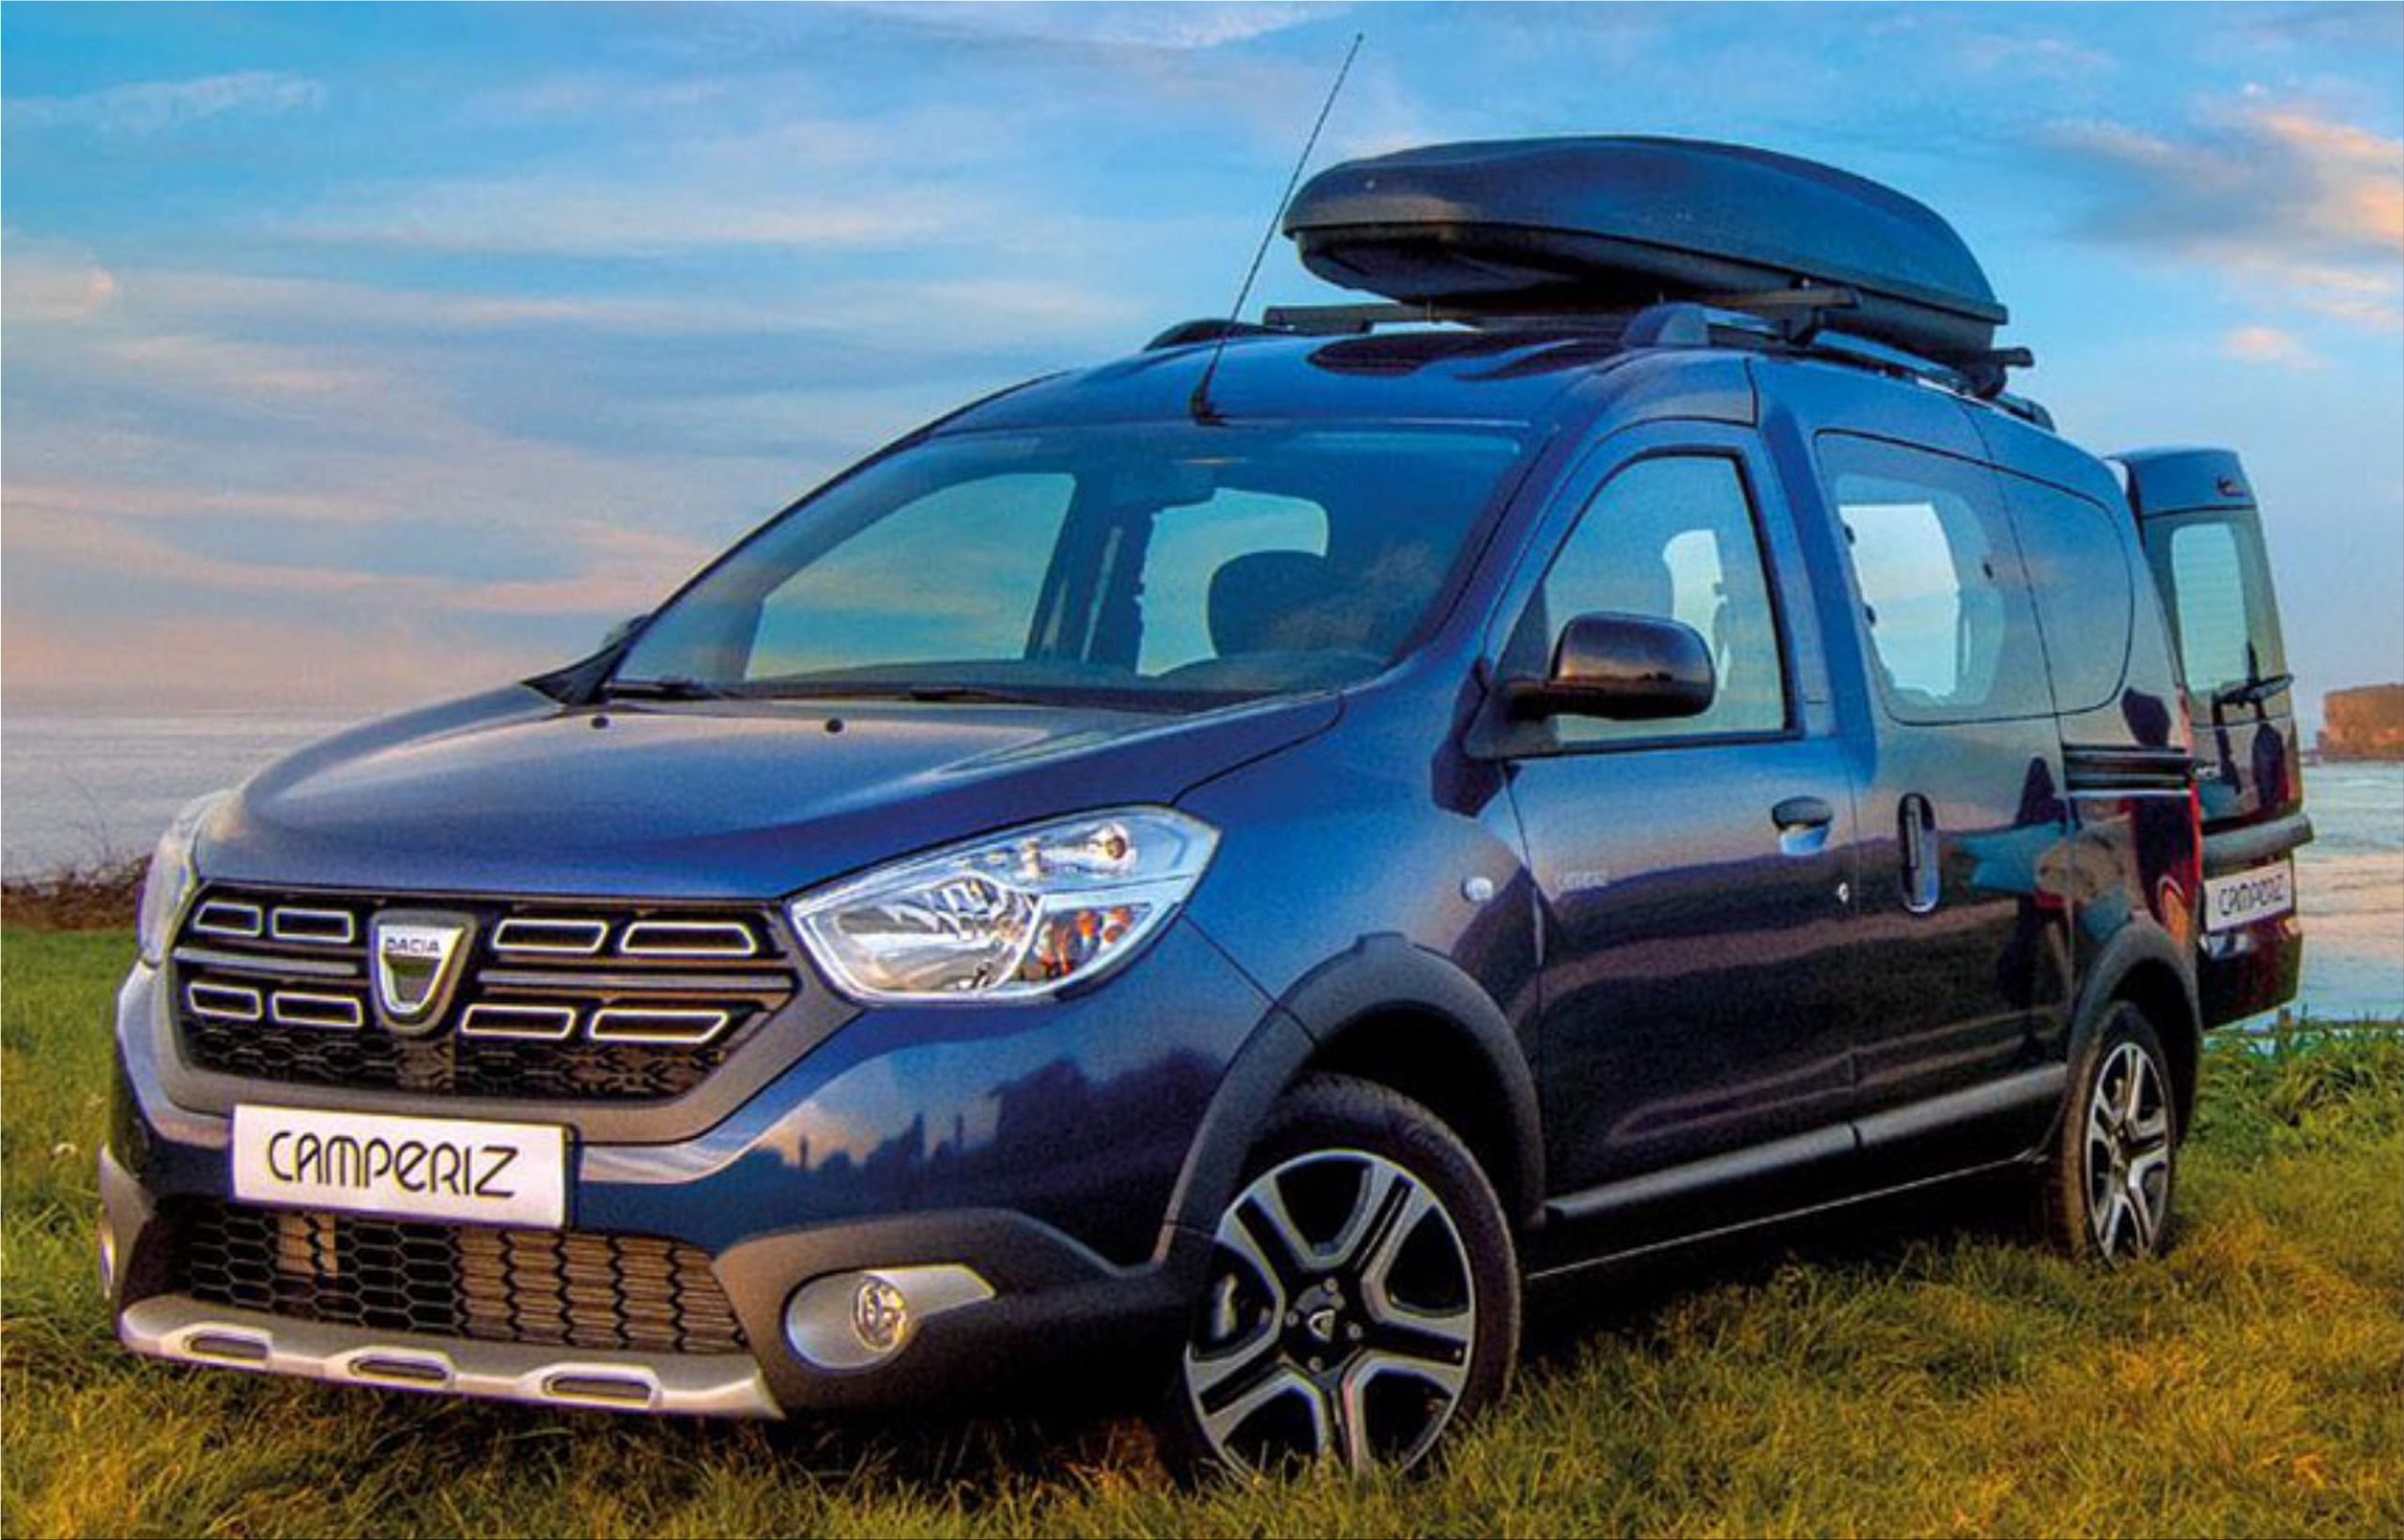 Dacia Dokker Yevana Camper Will Only Cost You Around $22,000